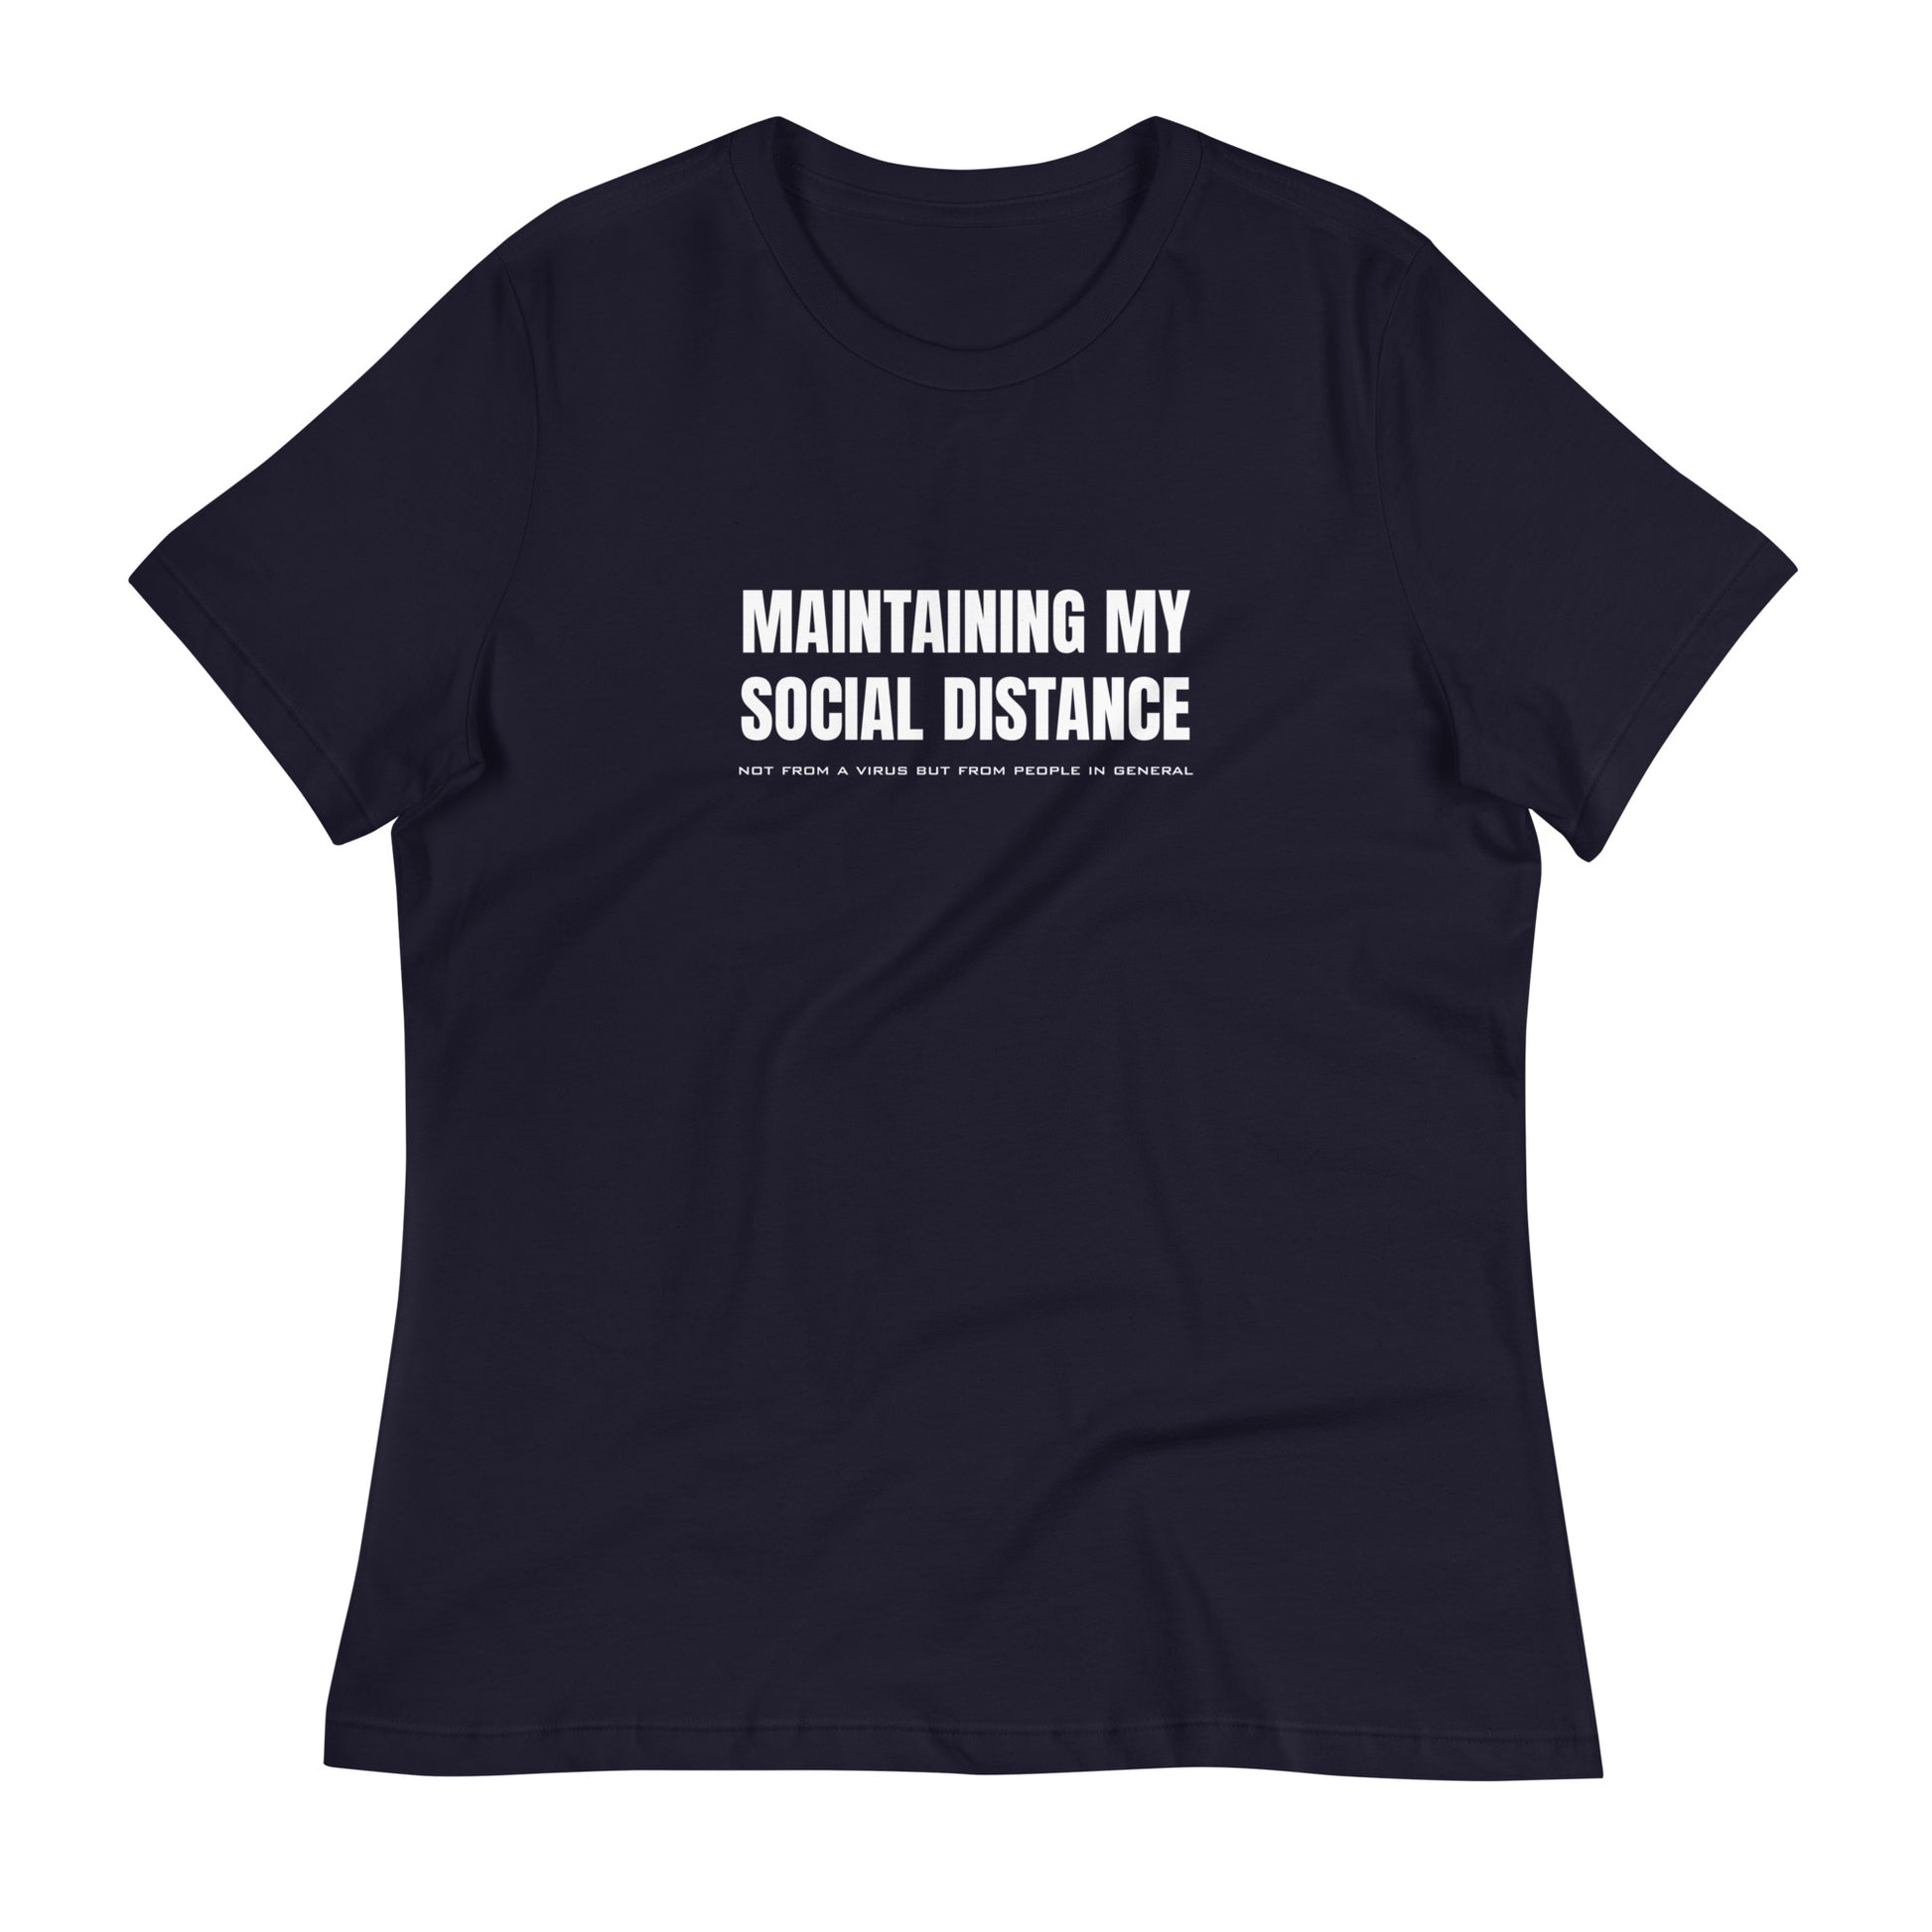 Navy women's relaxed fit t-shirt with white graphic: "MAINTAINING MY SOCIAL DISTANCE not from a virus but from people in general"